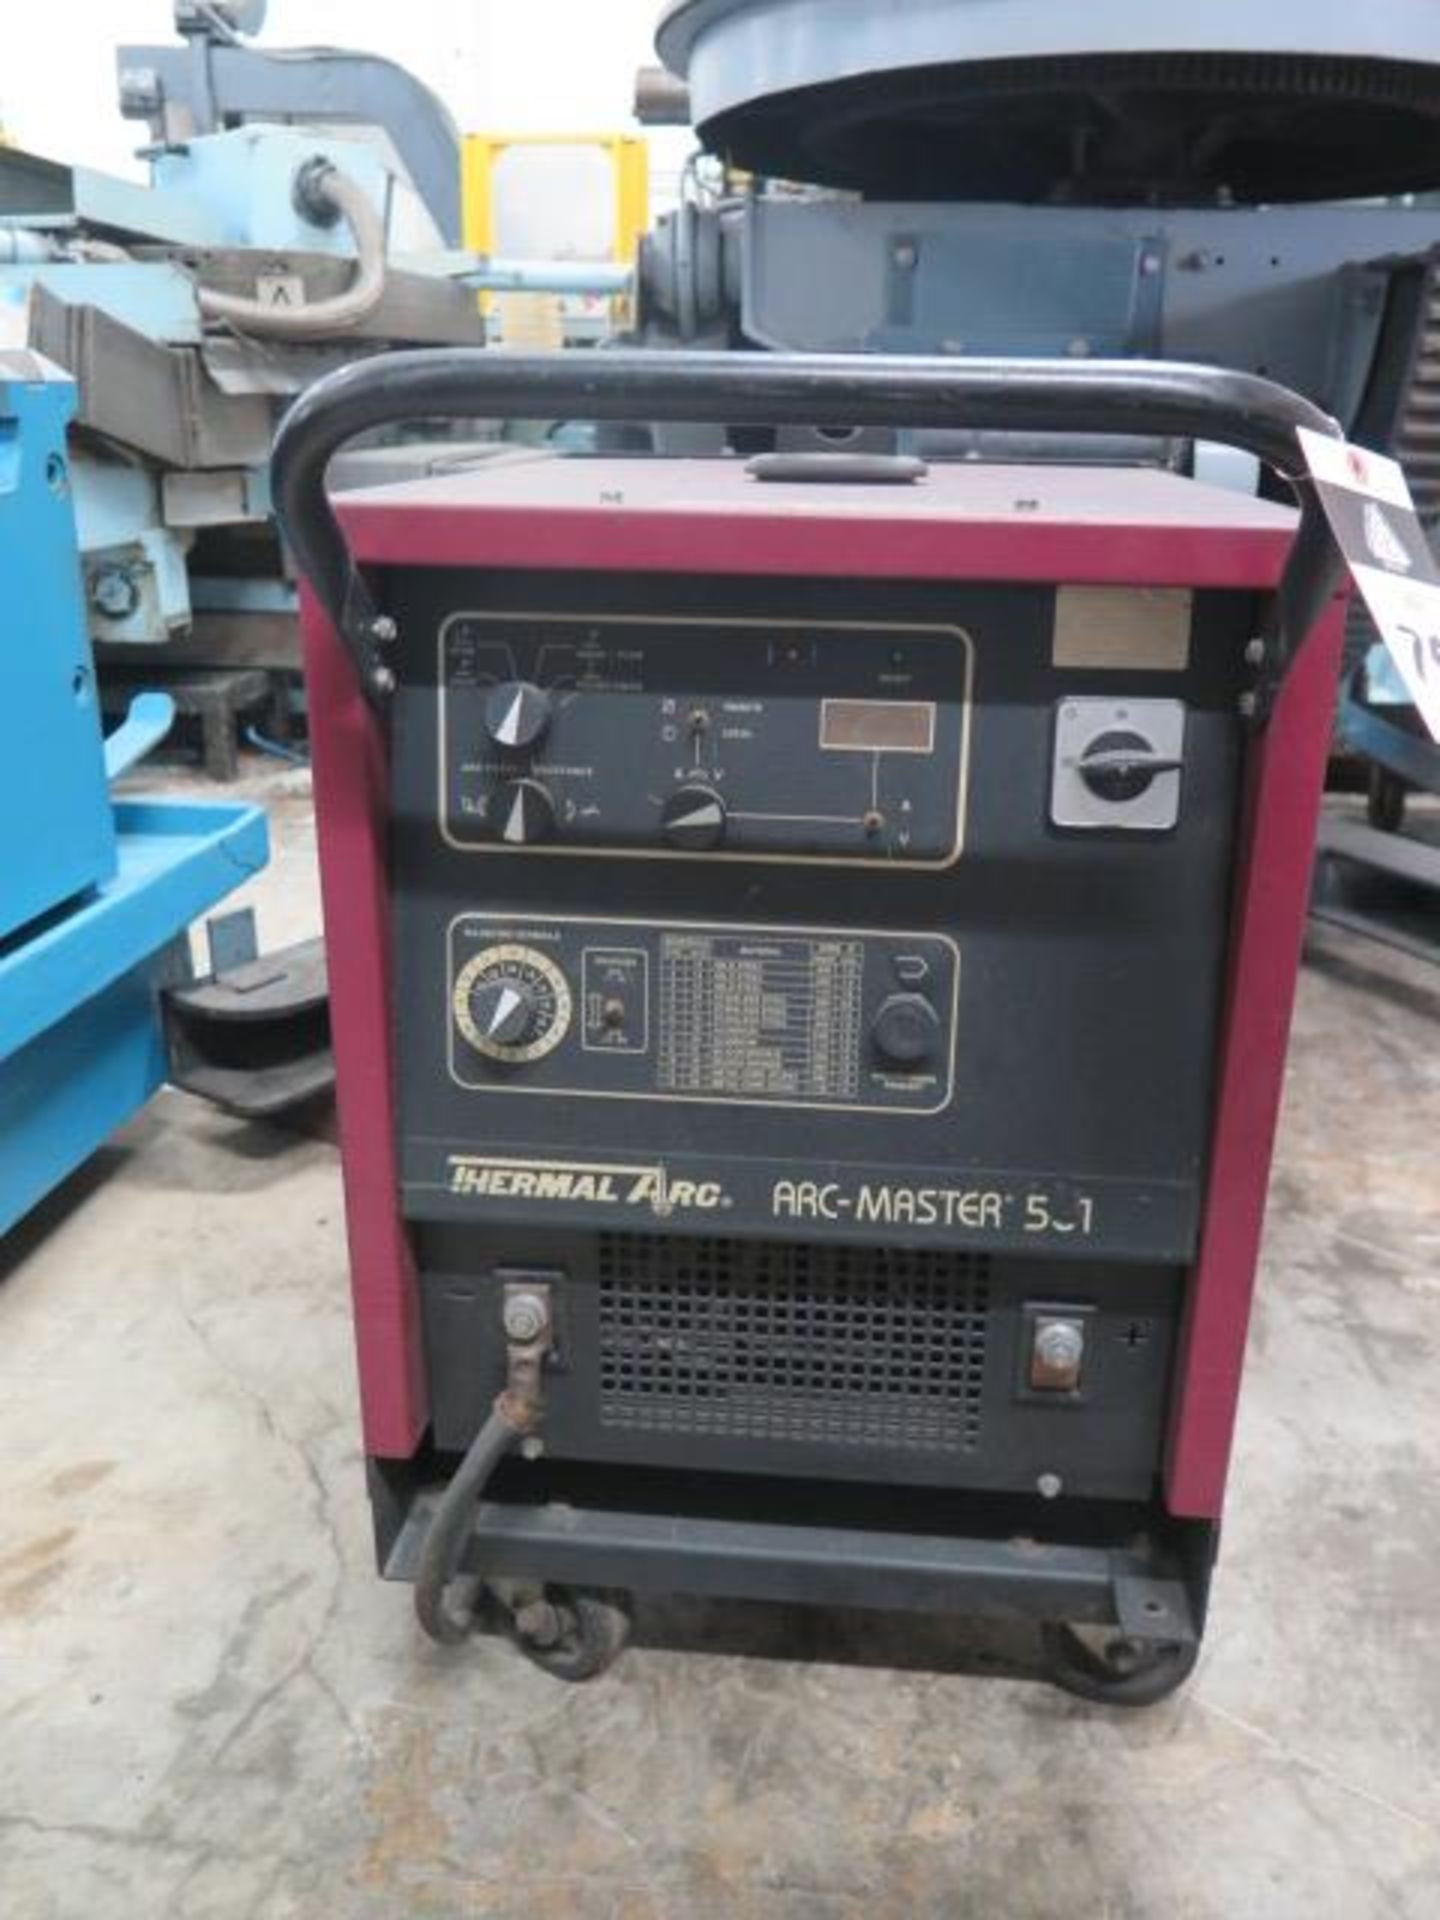 Thermal Arc ArcMaster 501 DC Arc Welding Power Source (SOLD AS-IS - NO WARRANTY) - Image 2 of 6